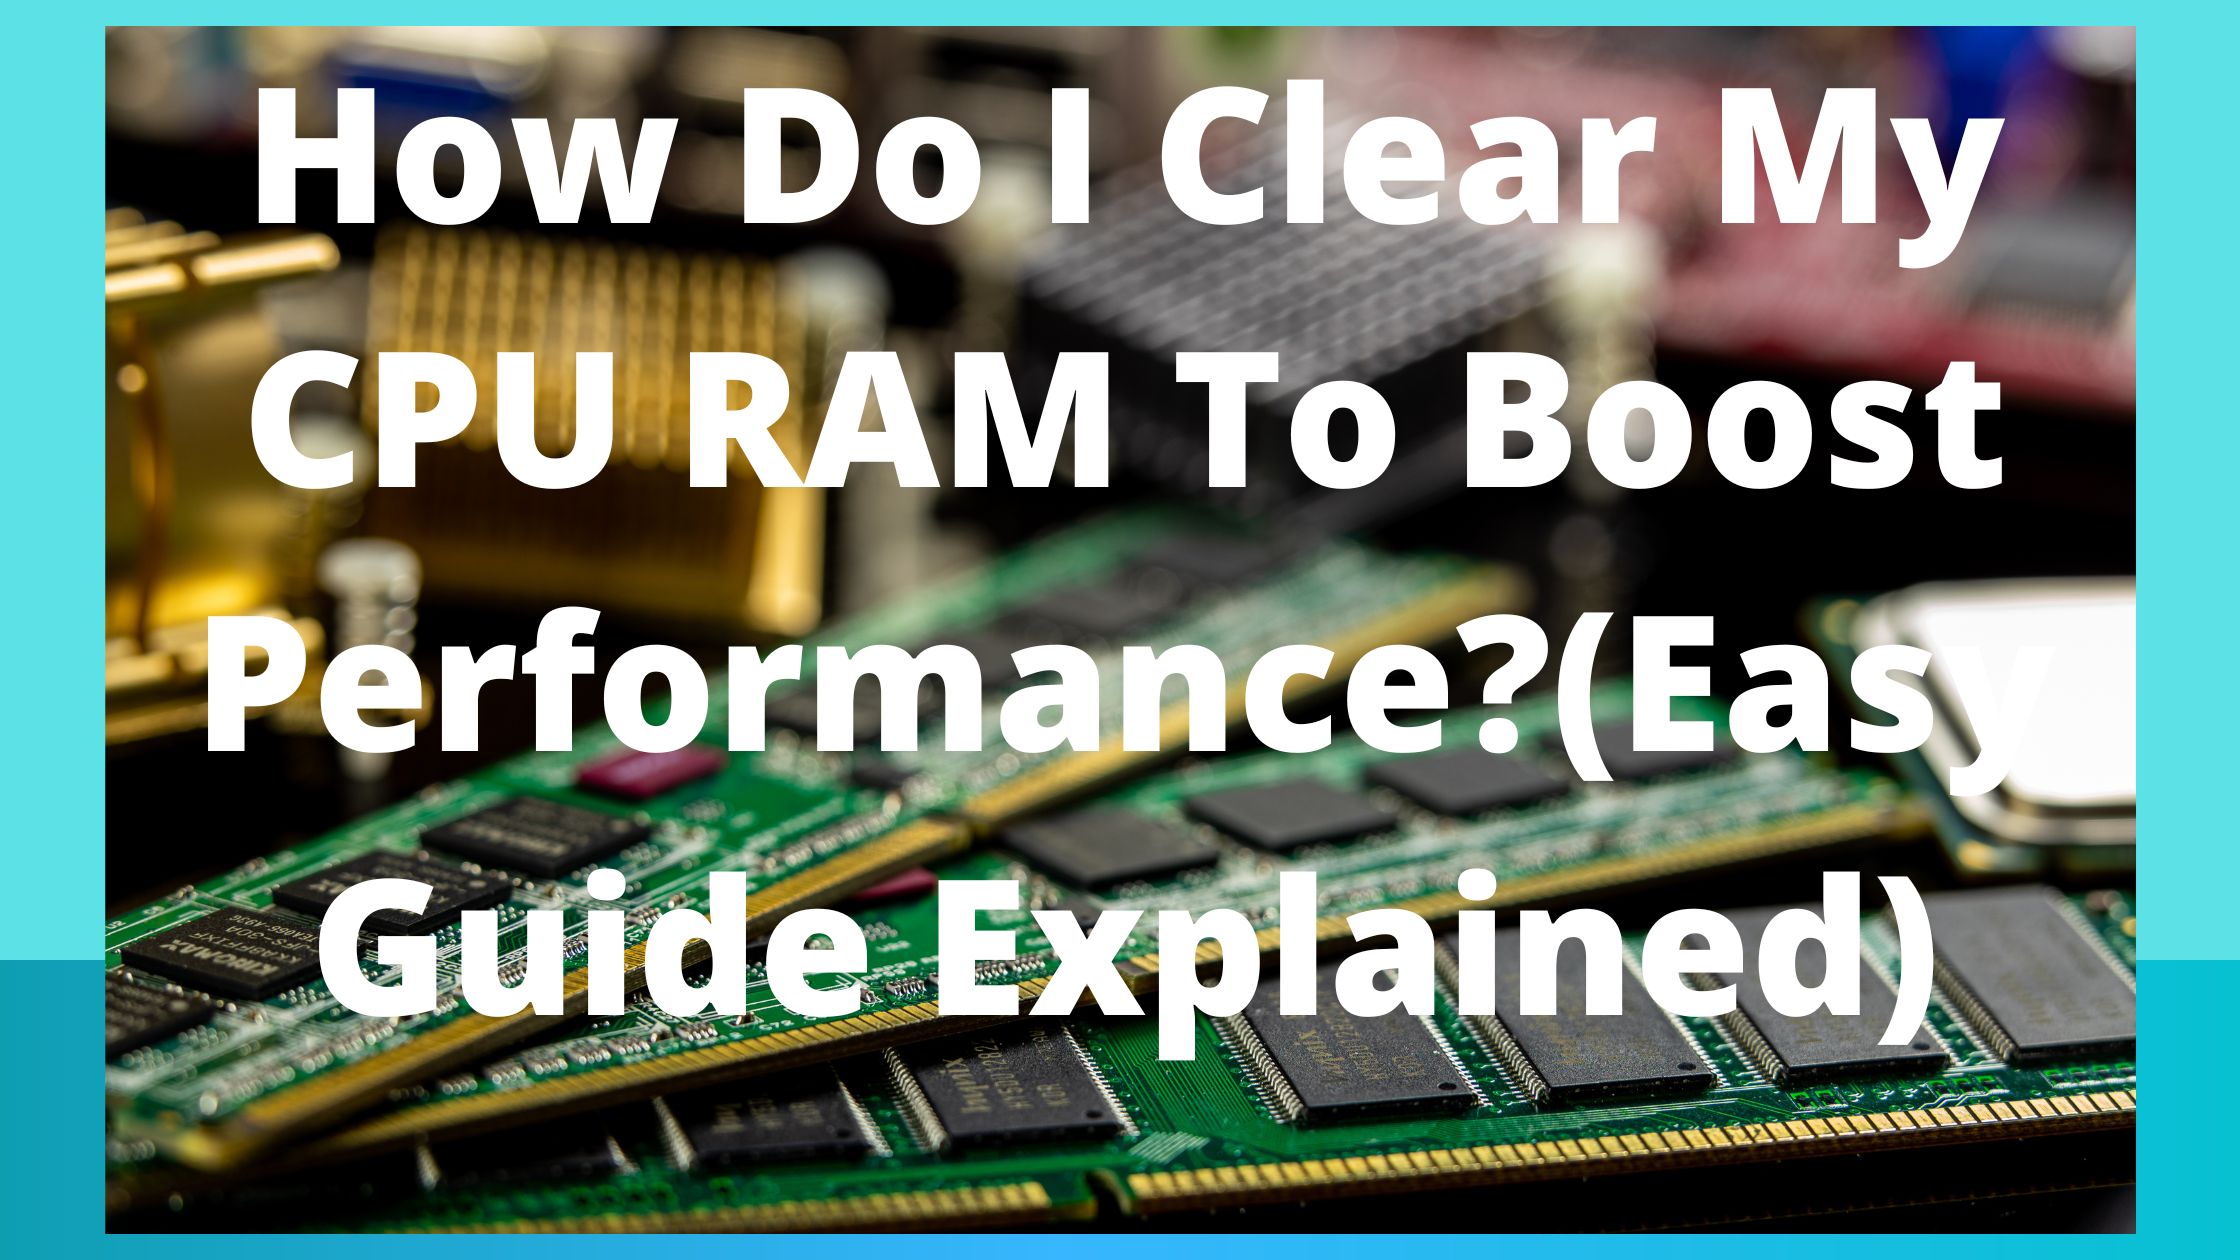 How Do I Clear My CPU RAM To Boost Performance?(Easy Guide Explained)